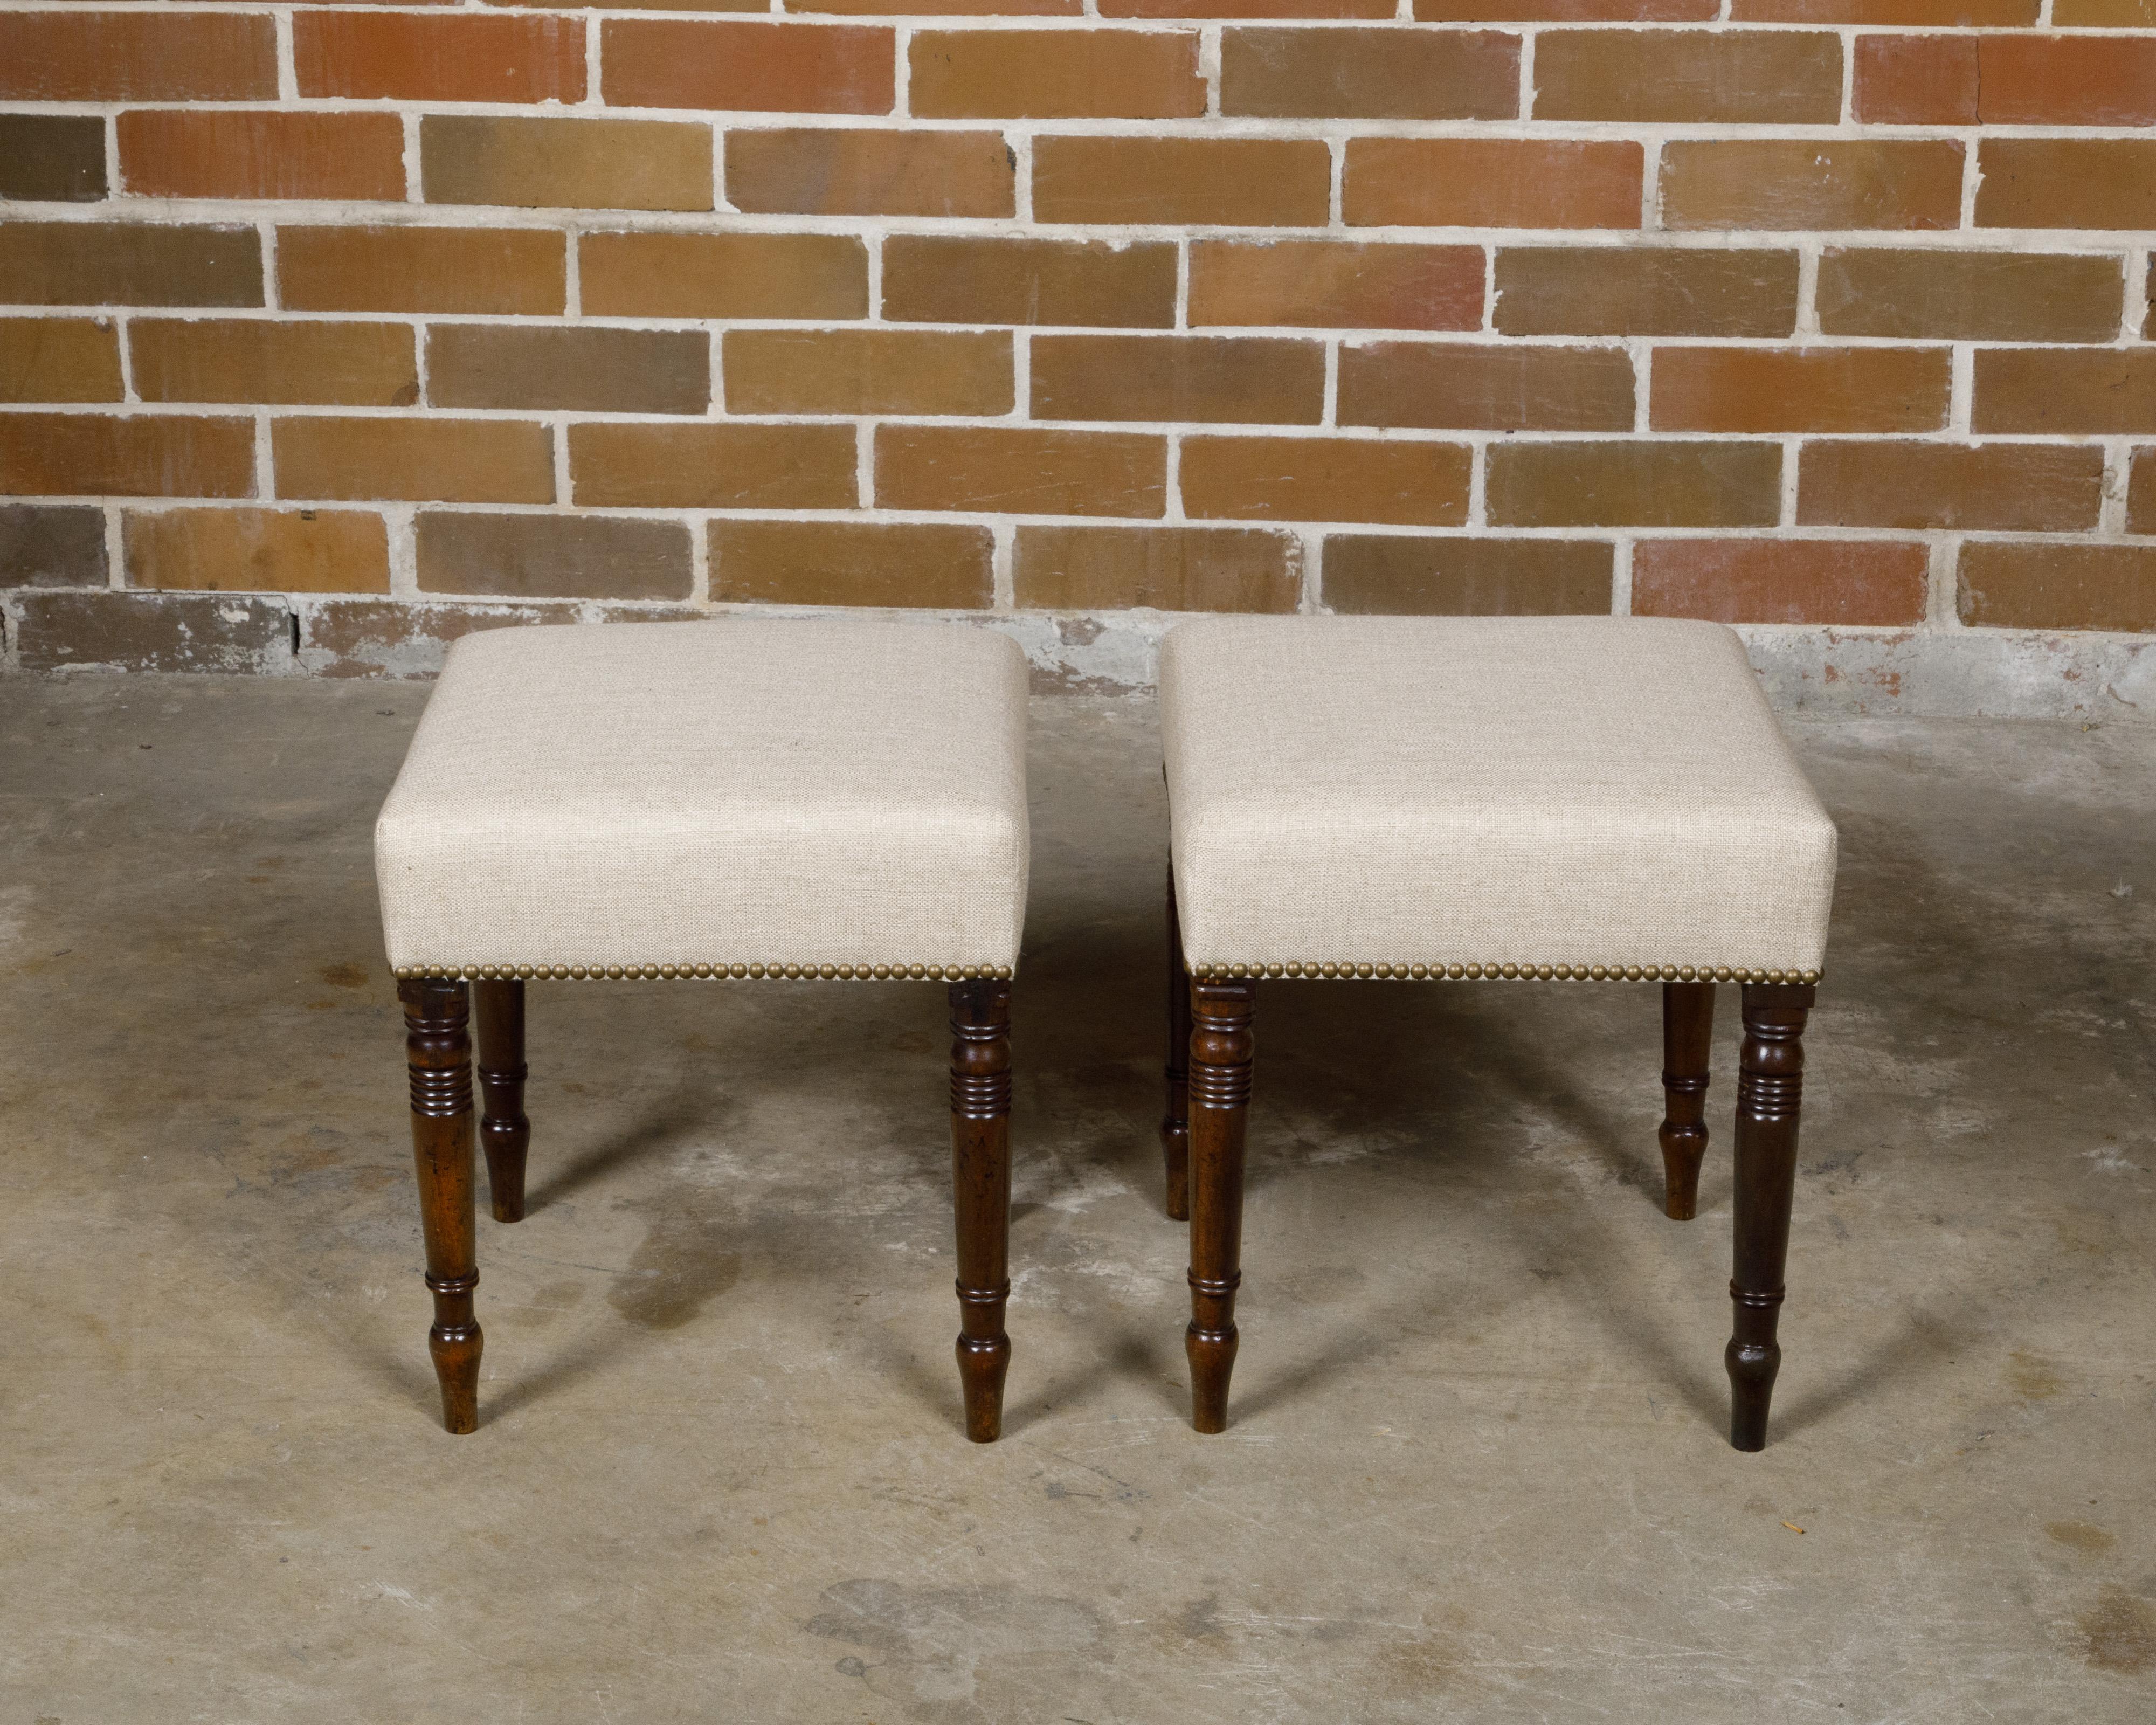 Pair of English Regency 19th Century Mahogany Stools with Turned Spindle Legs In Good Condition For Sale In Atlanta, GA